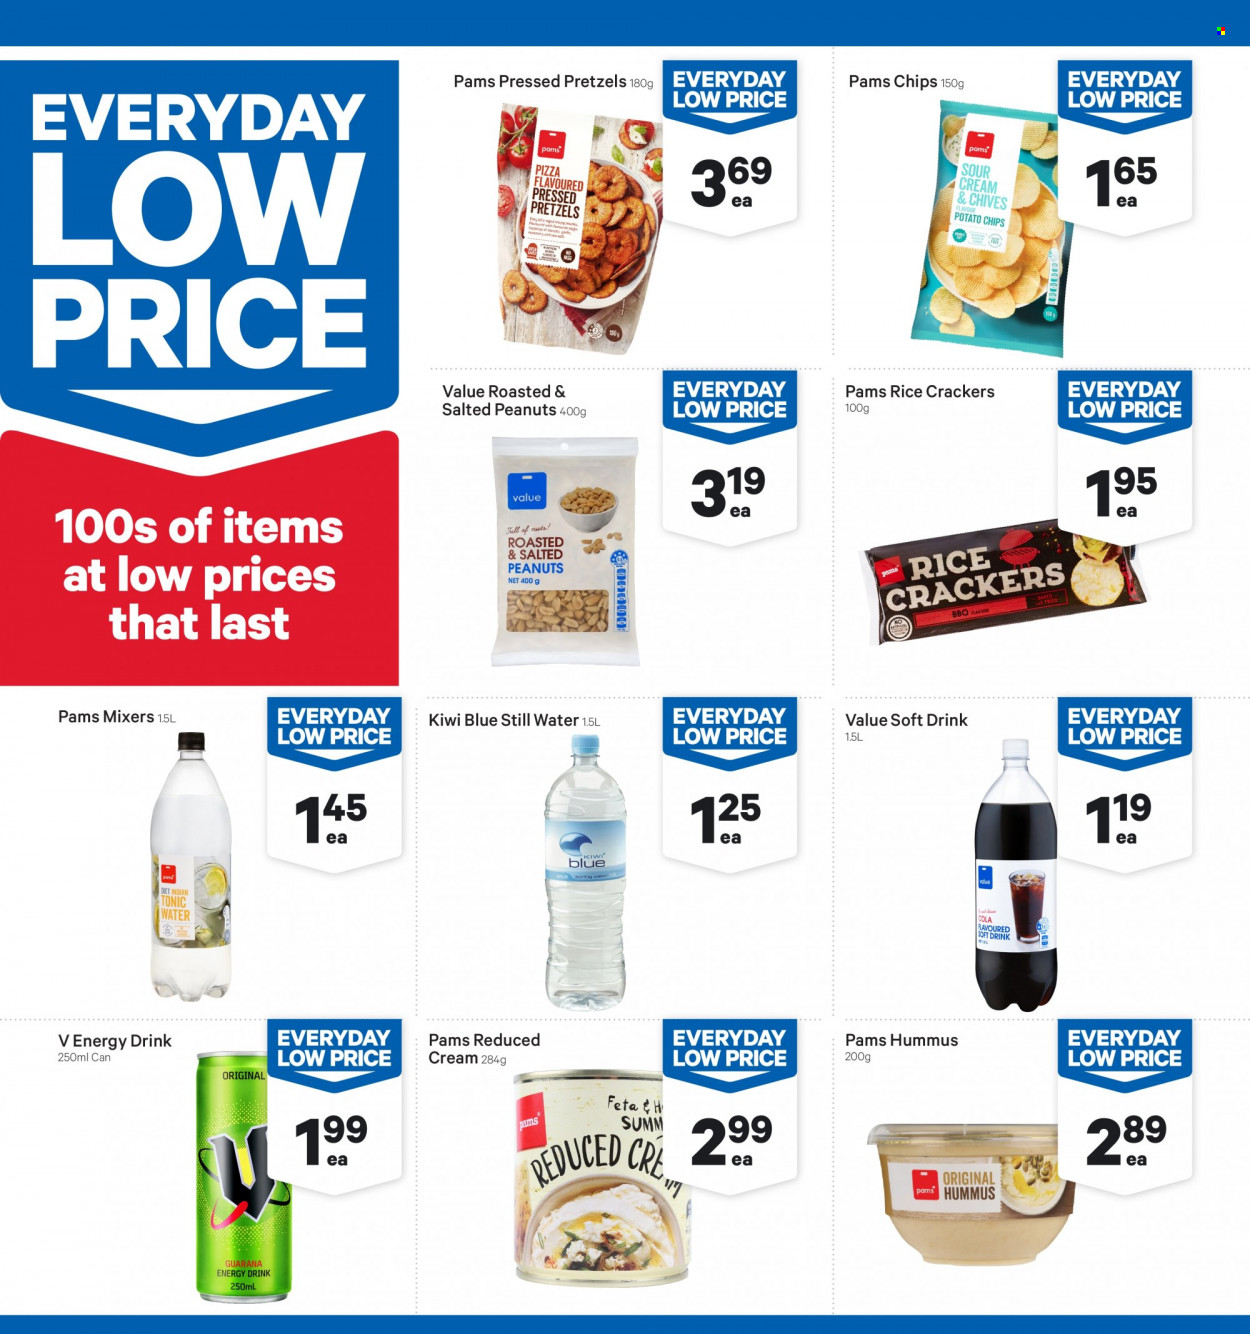 thumbnail - New World mailer - 27.03.2023 - 02.04.2023 - Sales products - pretzels, chives, kiwi, hummus, feta, crackers, potato chips, chips, rice crackers, peanuts, energy drink, tonic, soft drink, spring water, still water. Page 3.